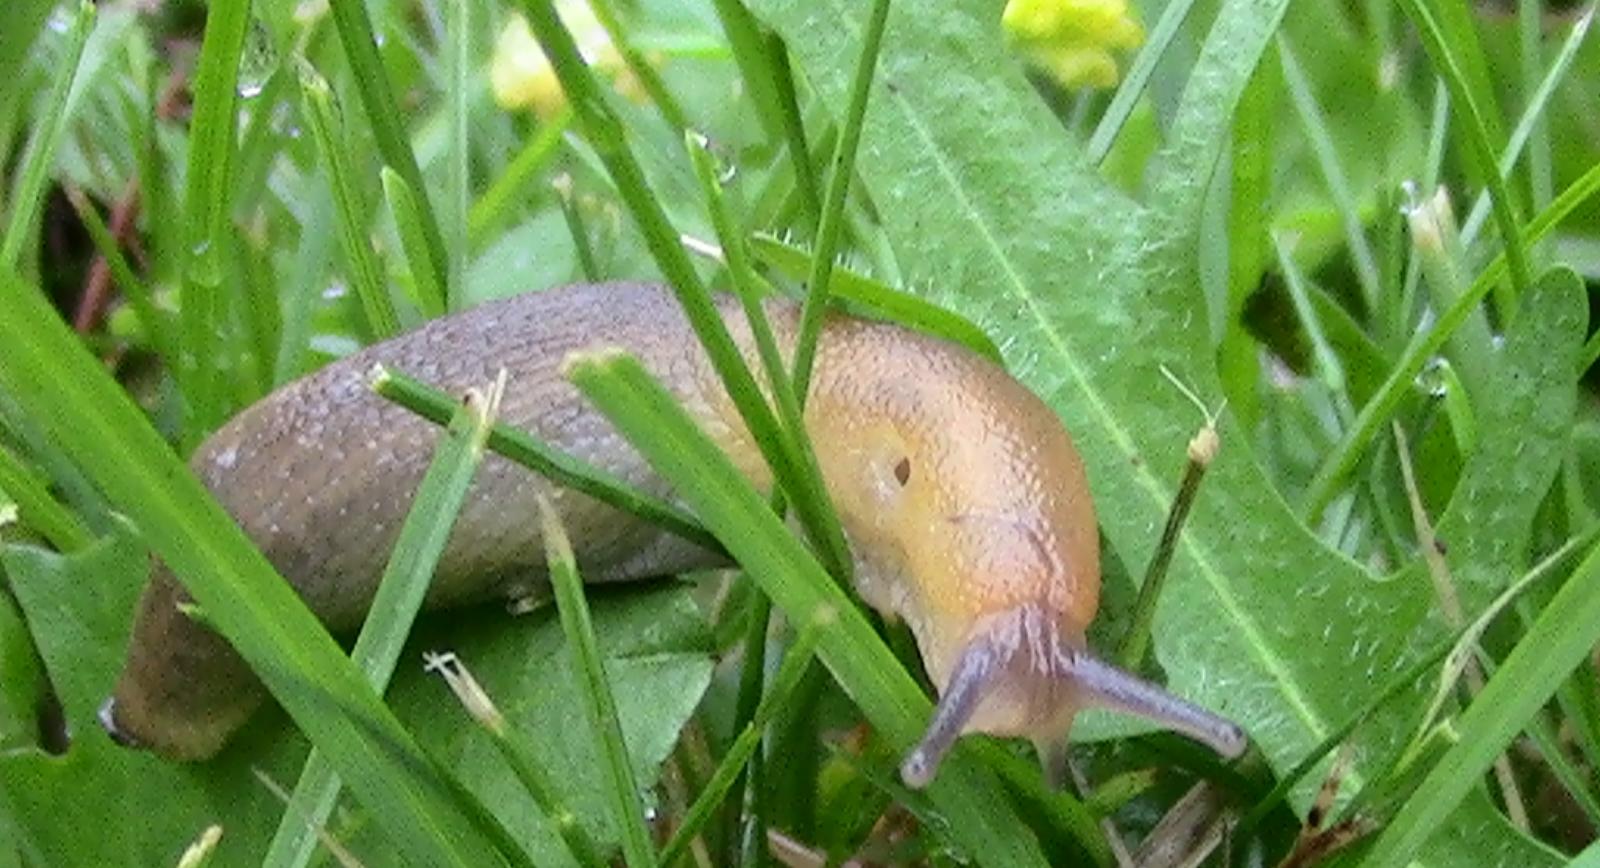 a slug crawling among the grass in a field